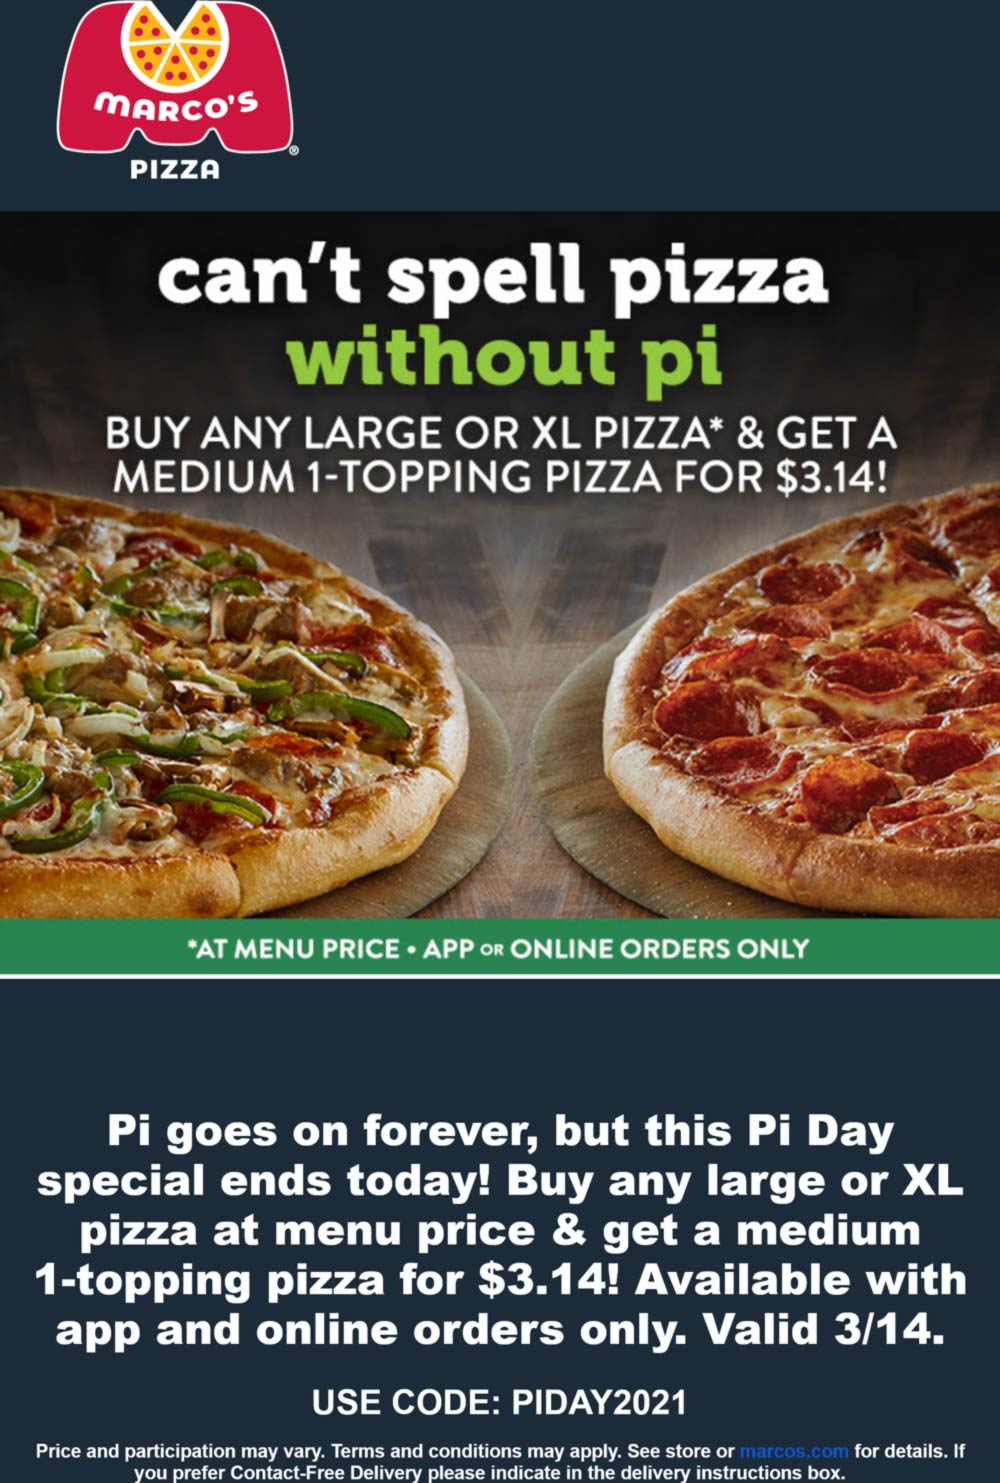 Second pizza for 3.14 today at Marcos Pizza via promo code PIDAY2021 